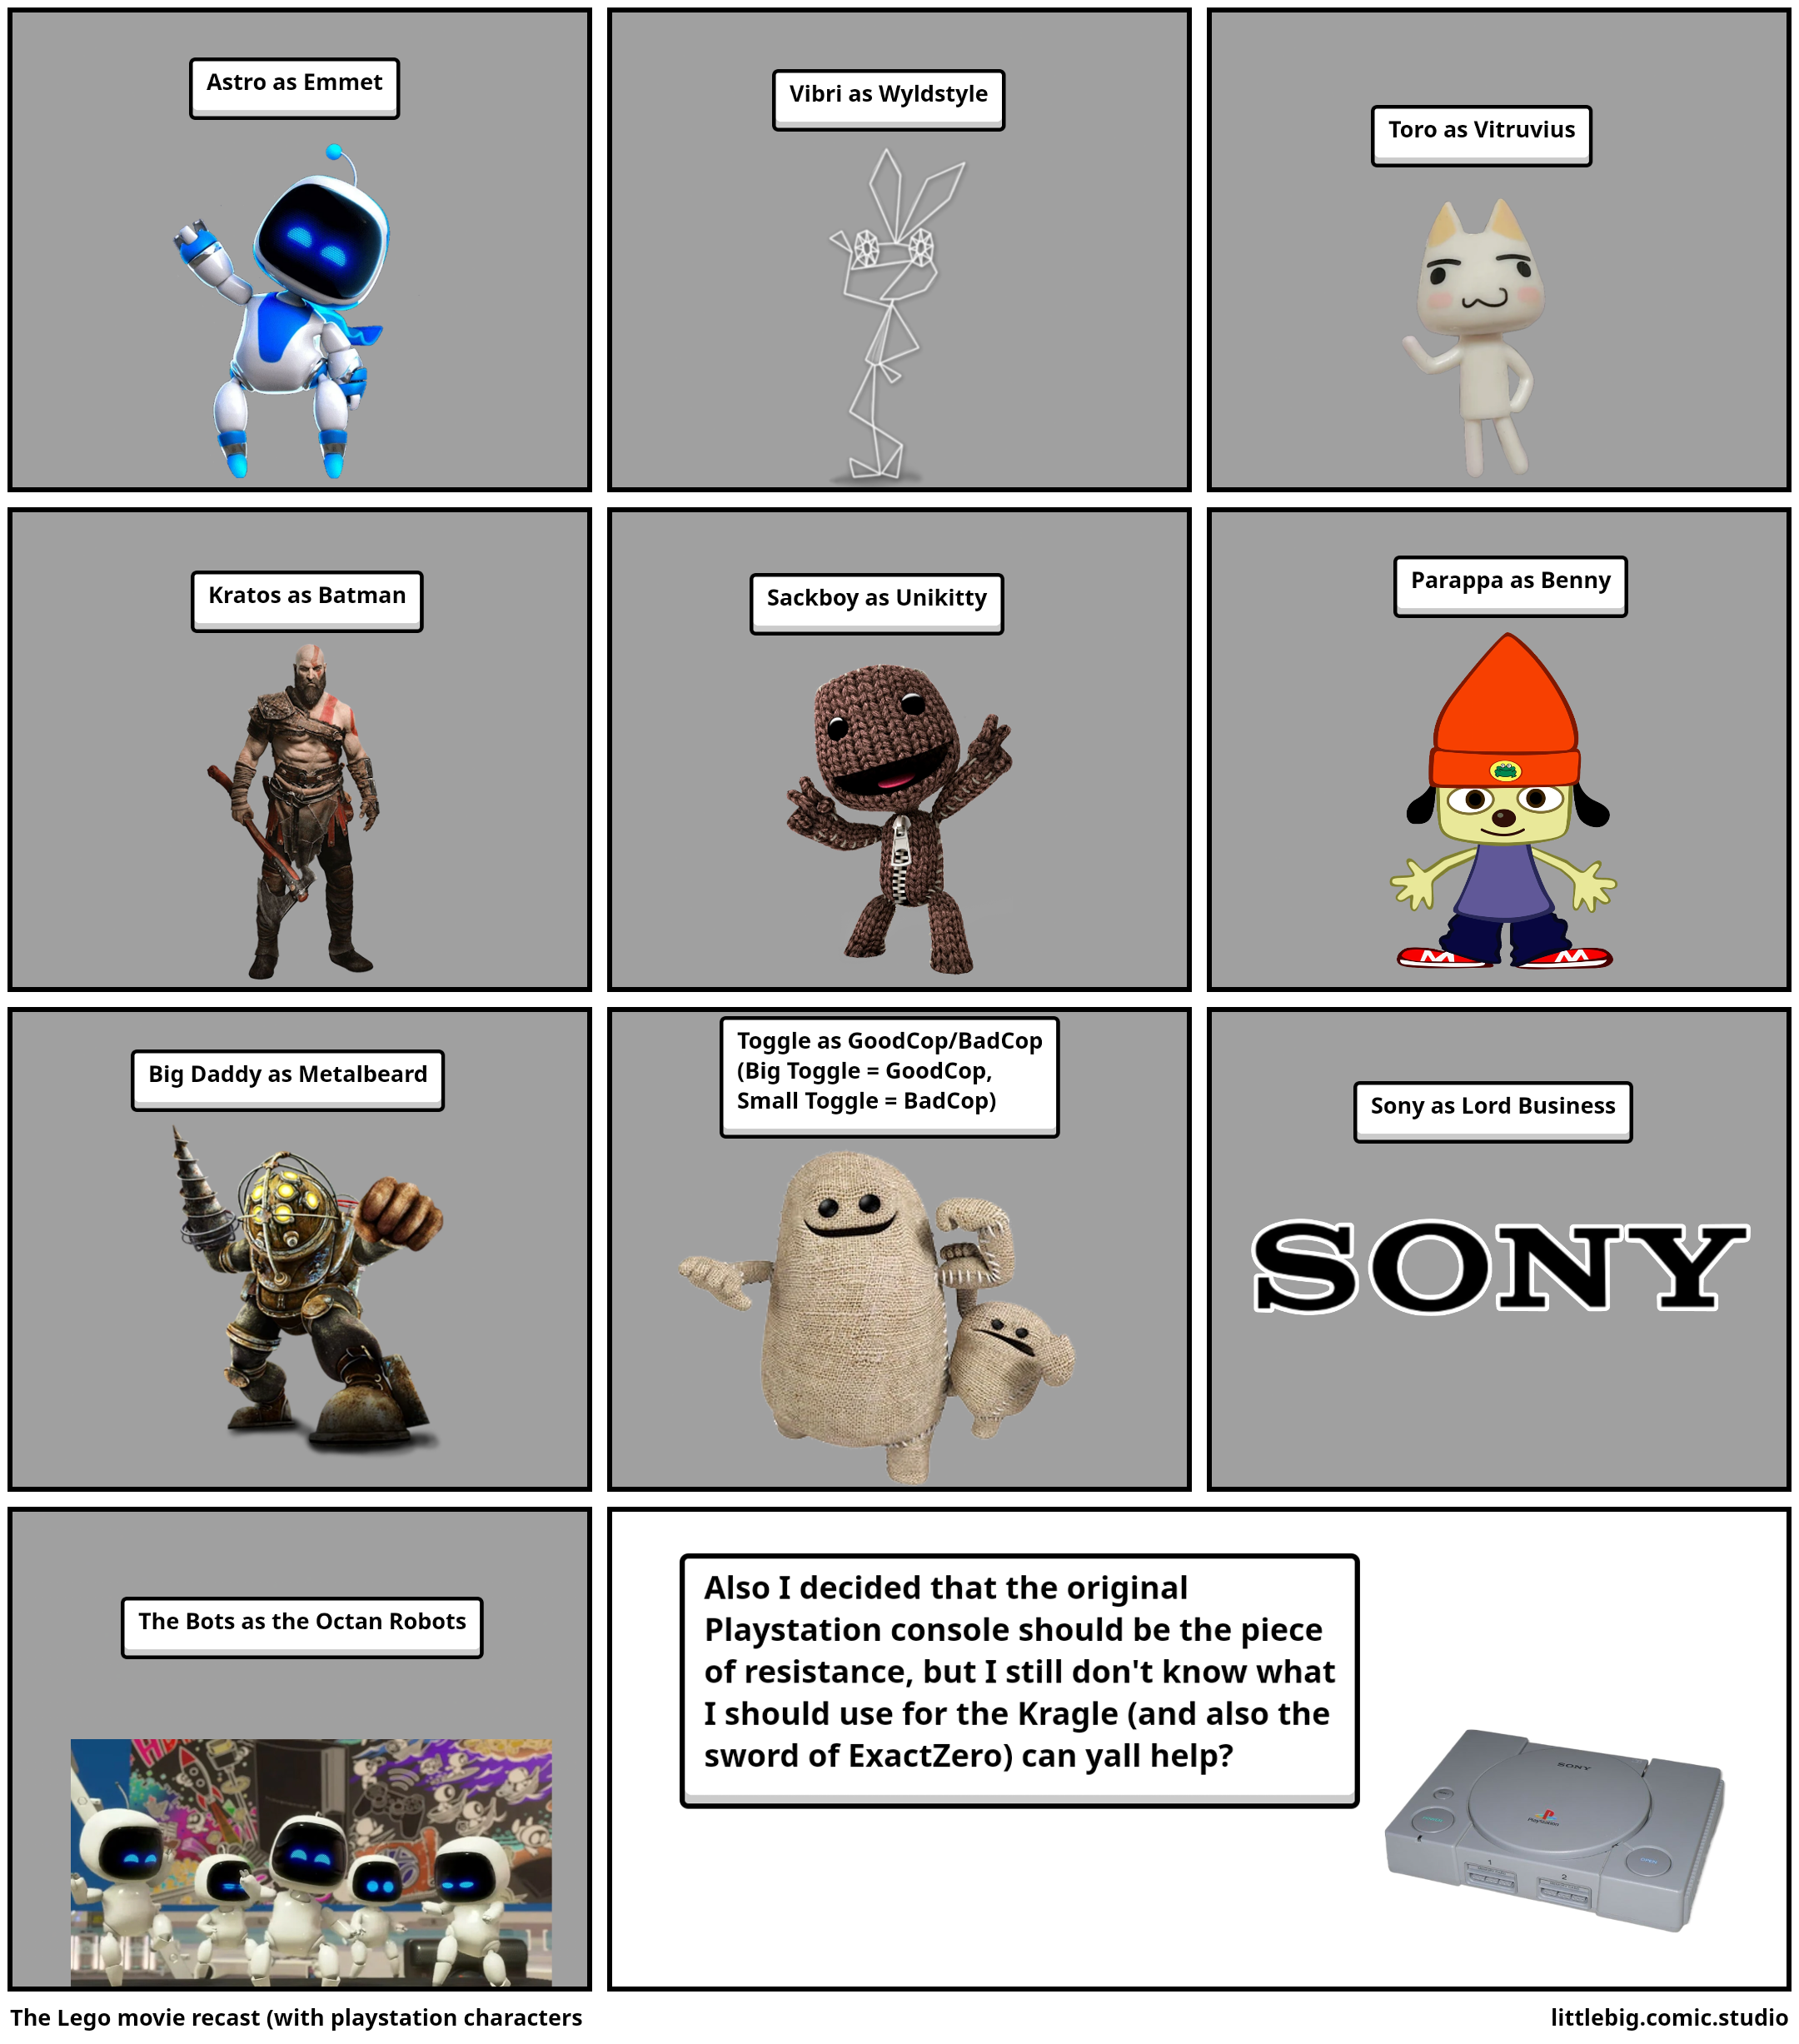 The Lego movie recast (with playstation characters